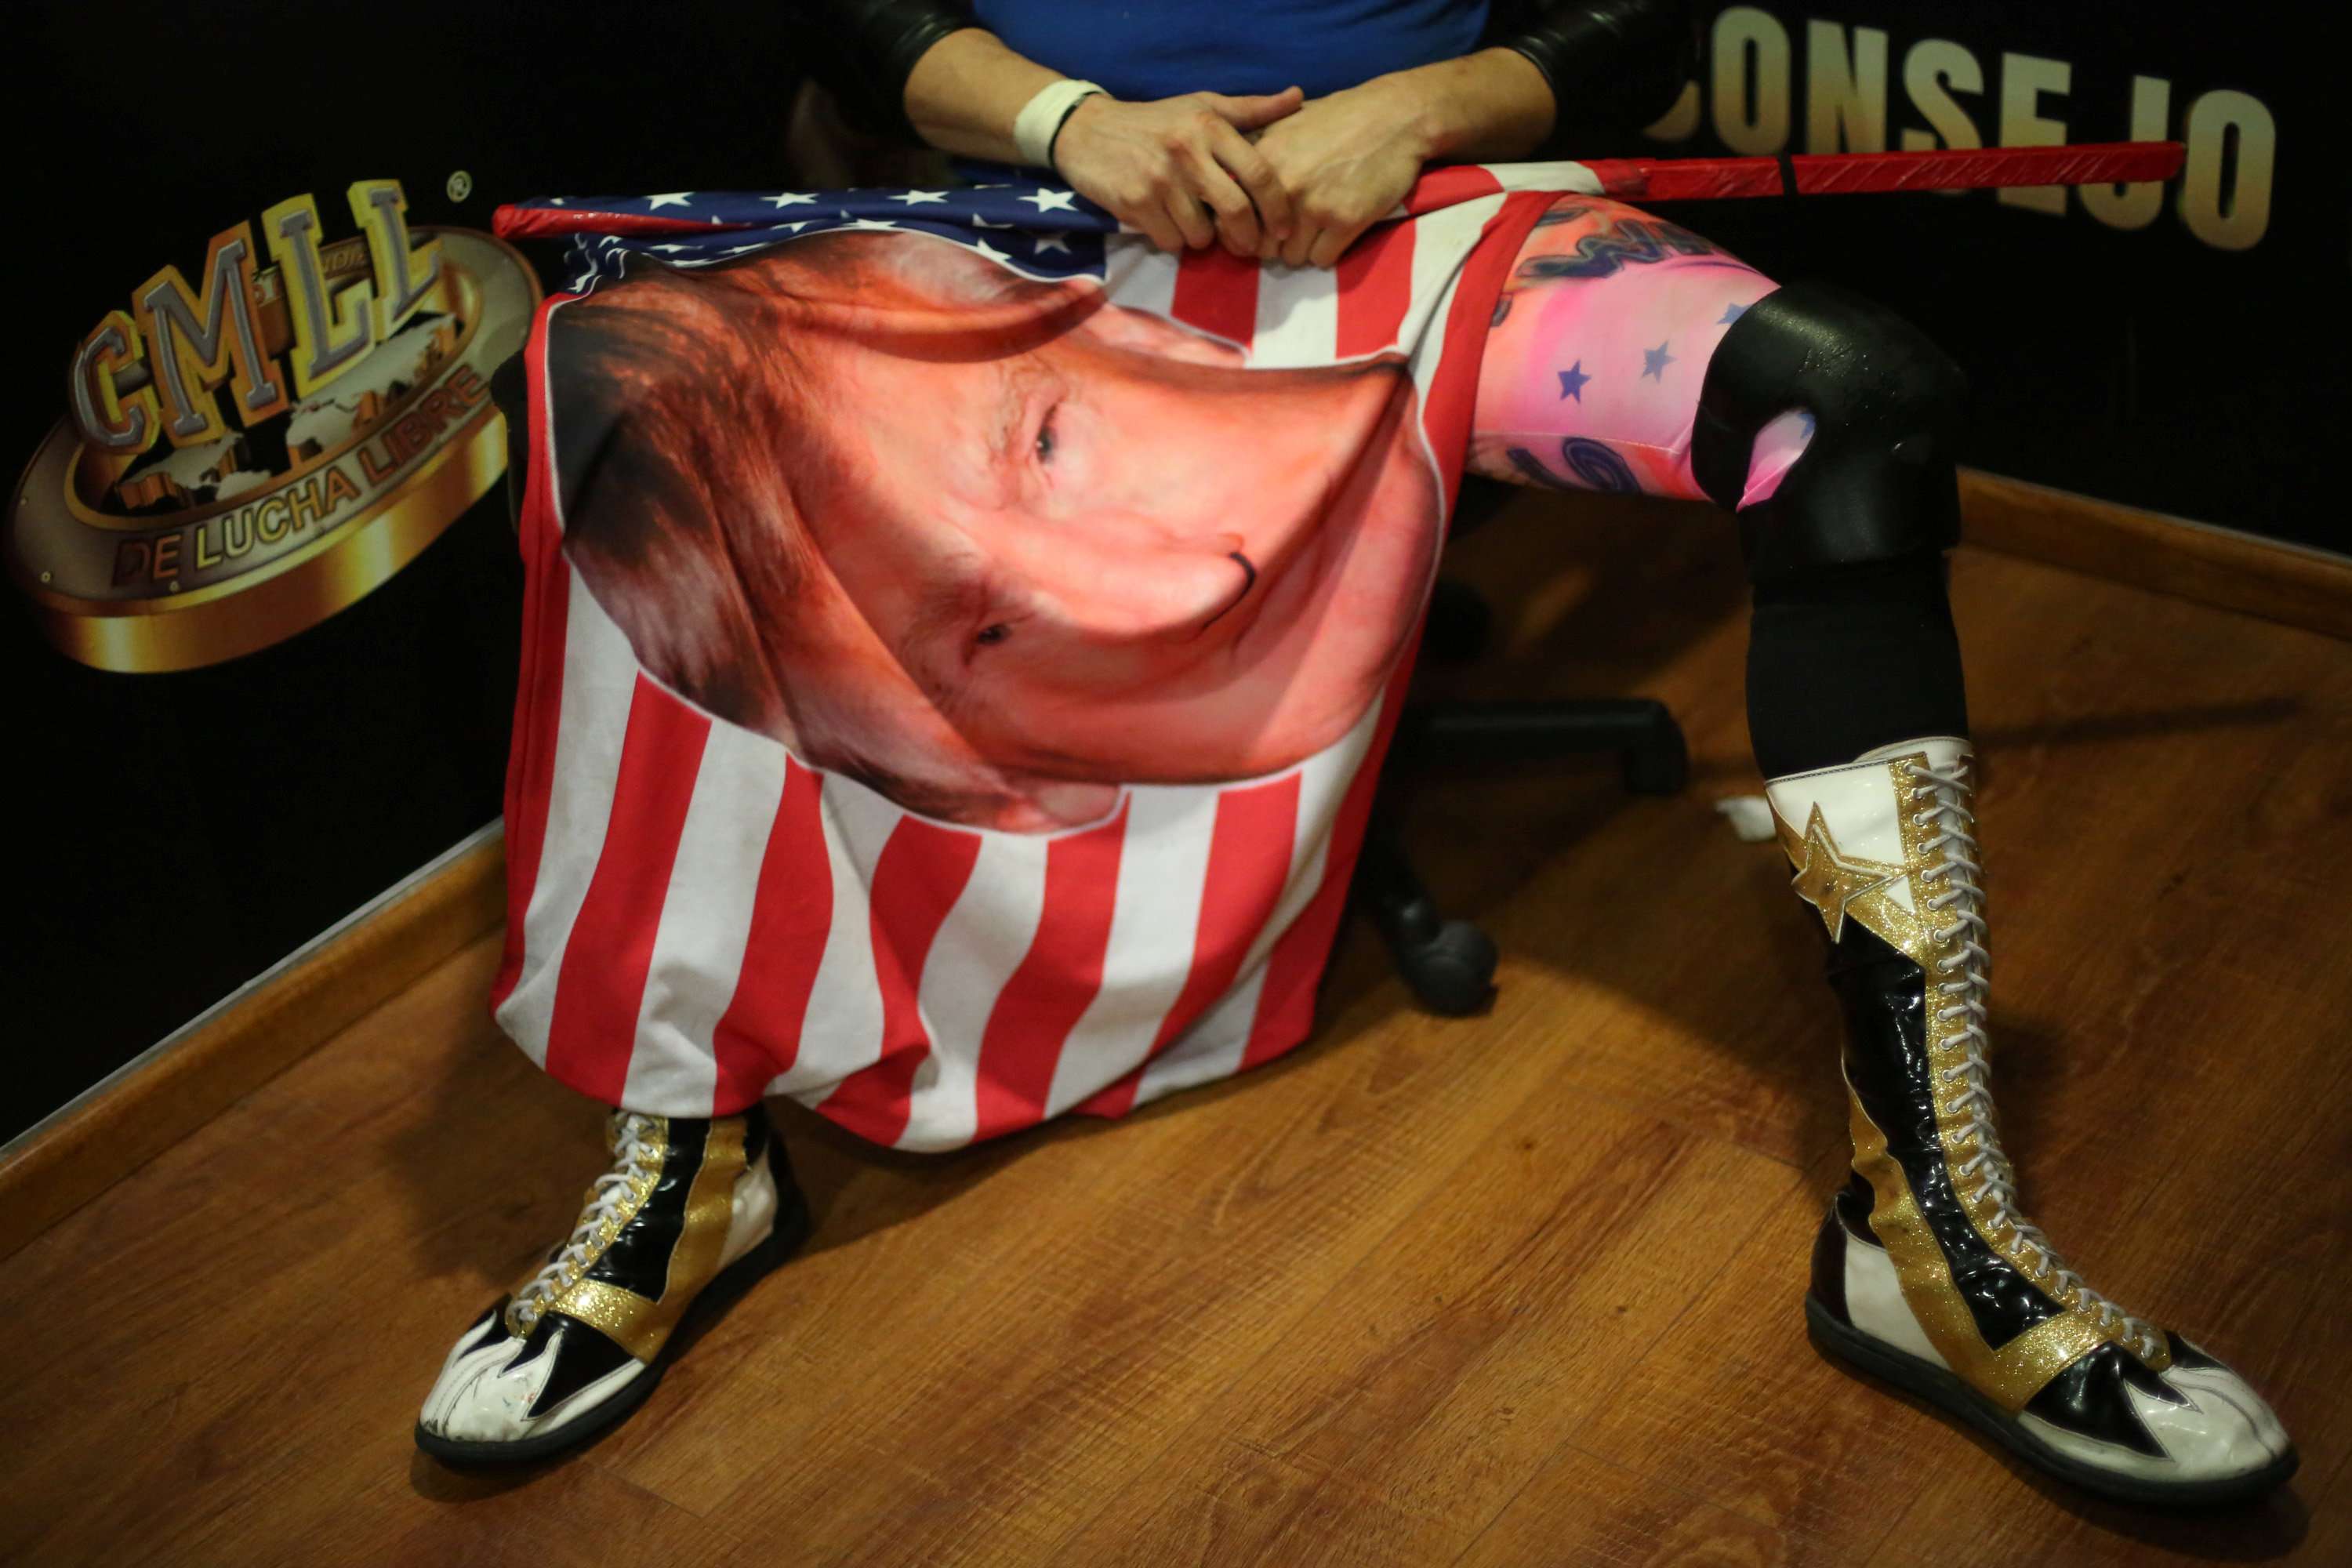 A US wrestler role-playing as a fan of President Donald Trump holds a flag with Trump's face during an interview, before a wrestling match in Mexico City on Sunday. Trump’s presidency could go into free fall if he does not secure some victories in the coming year. Populist voters are fickle. Photo: Reuters